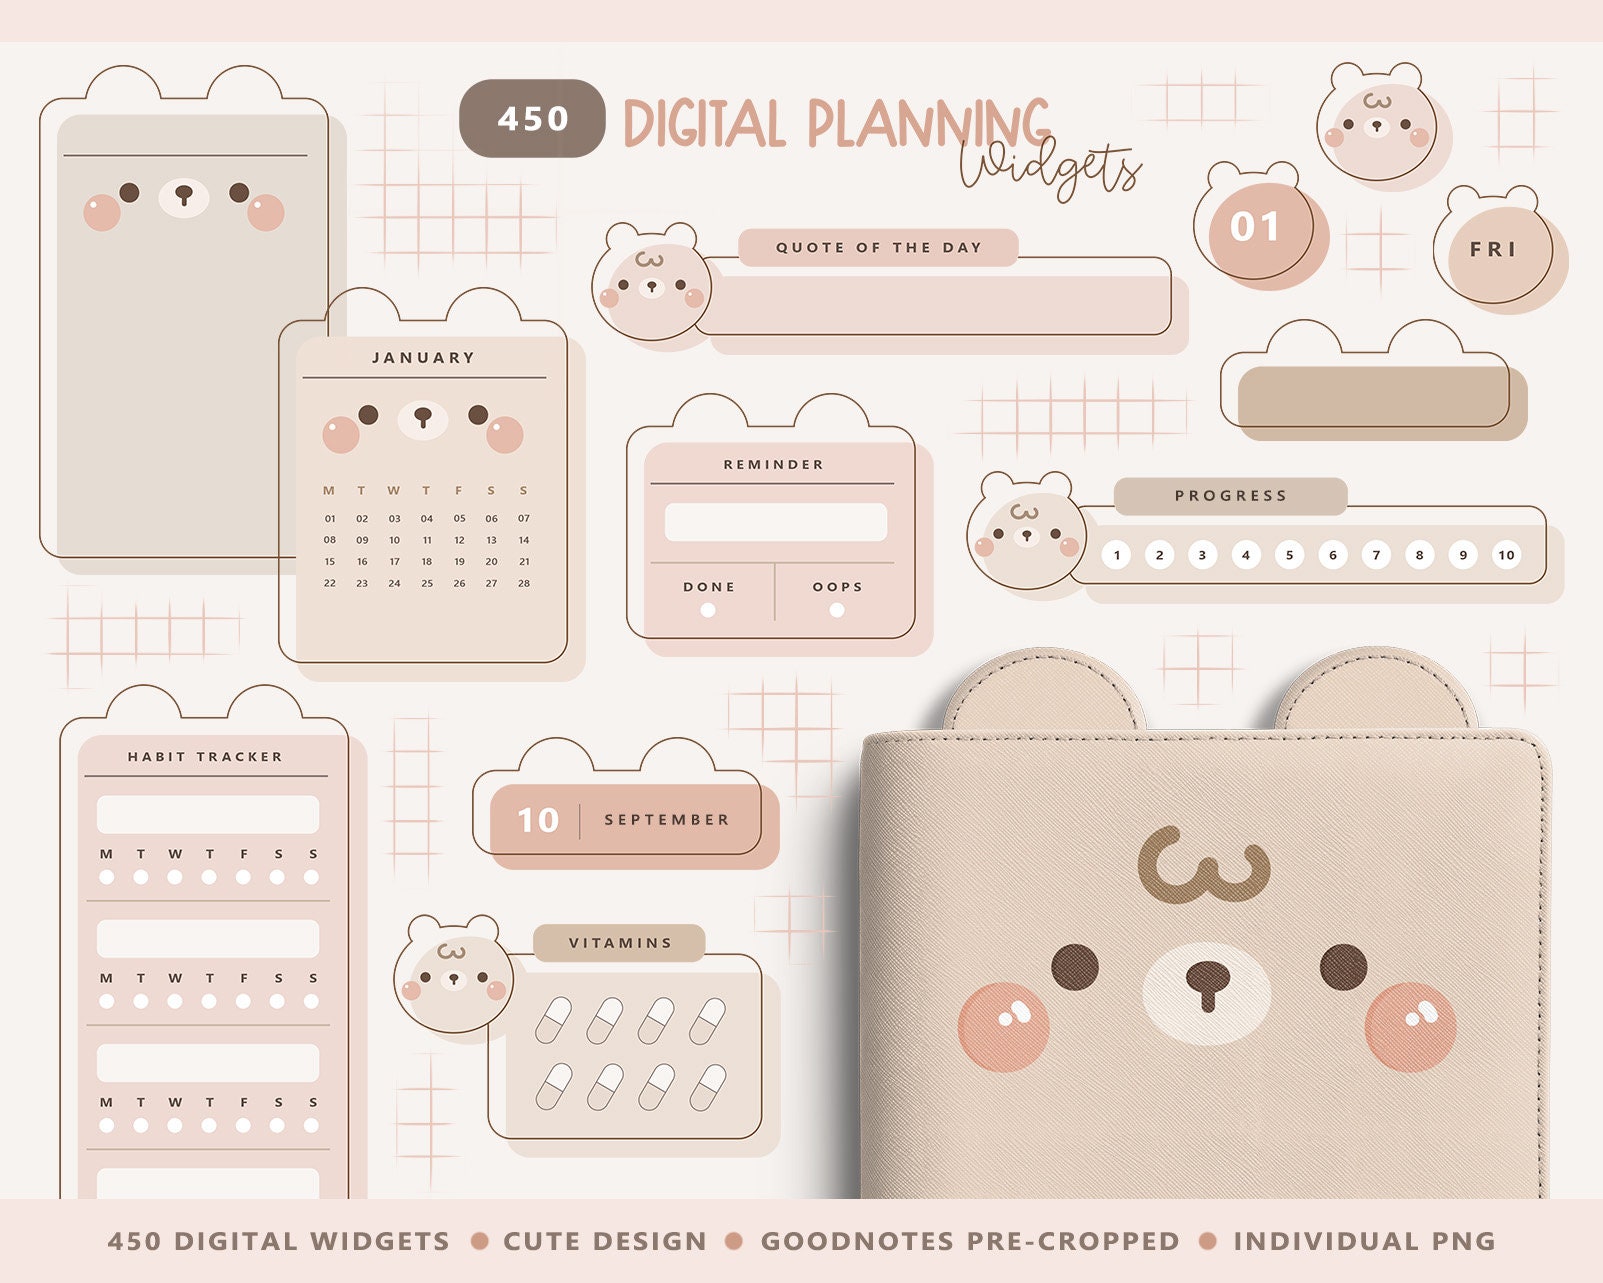 Happy Birthday Stickers for Digital Planner, Cute Animal Character